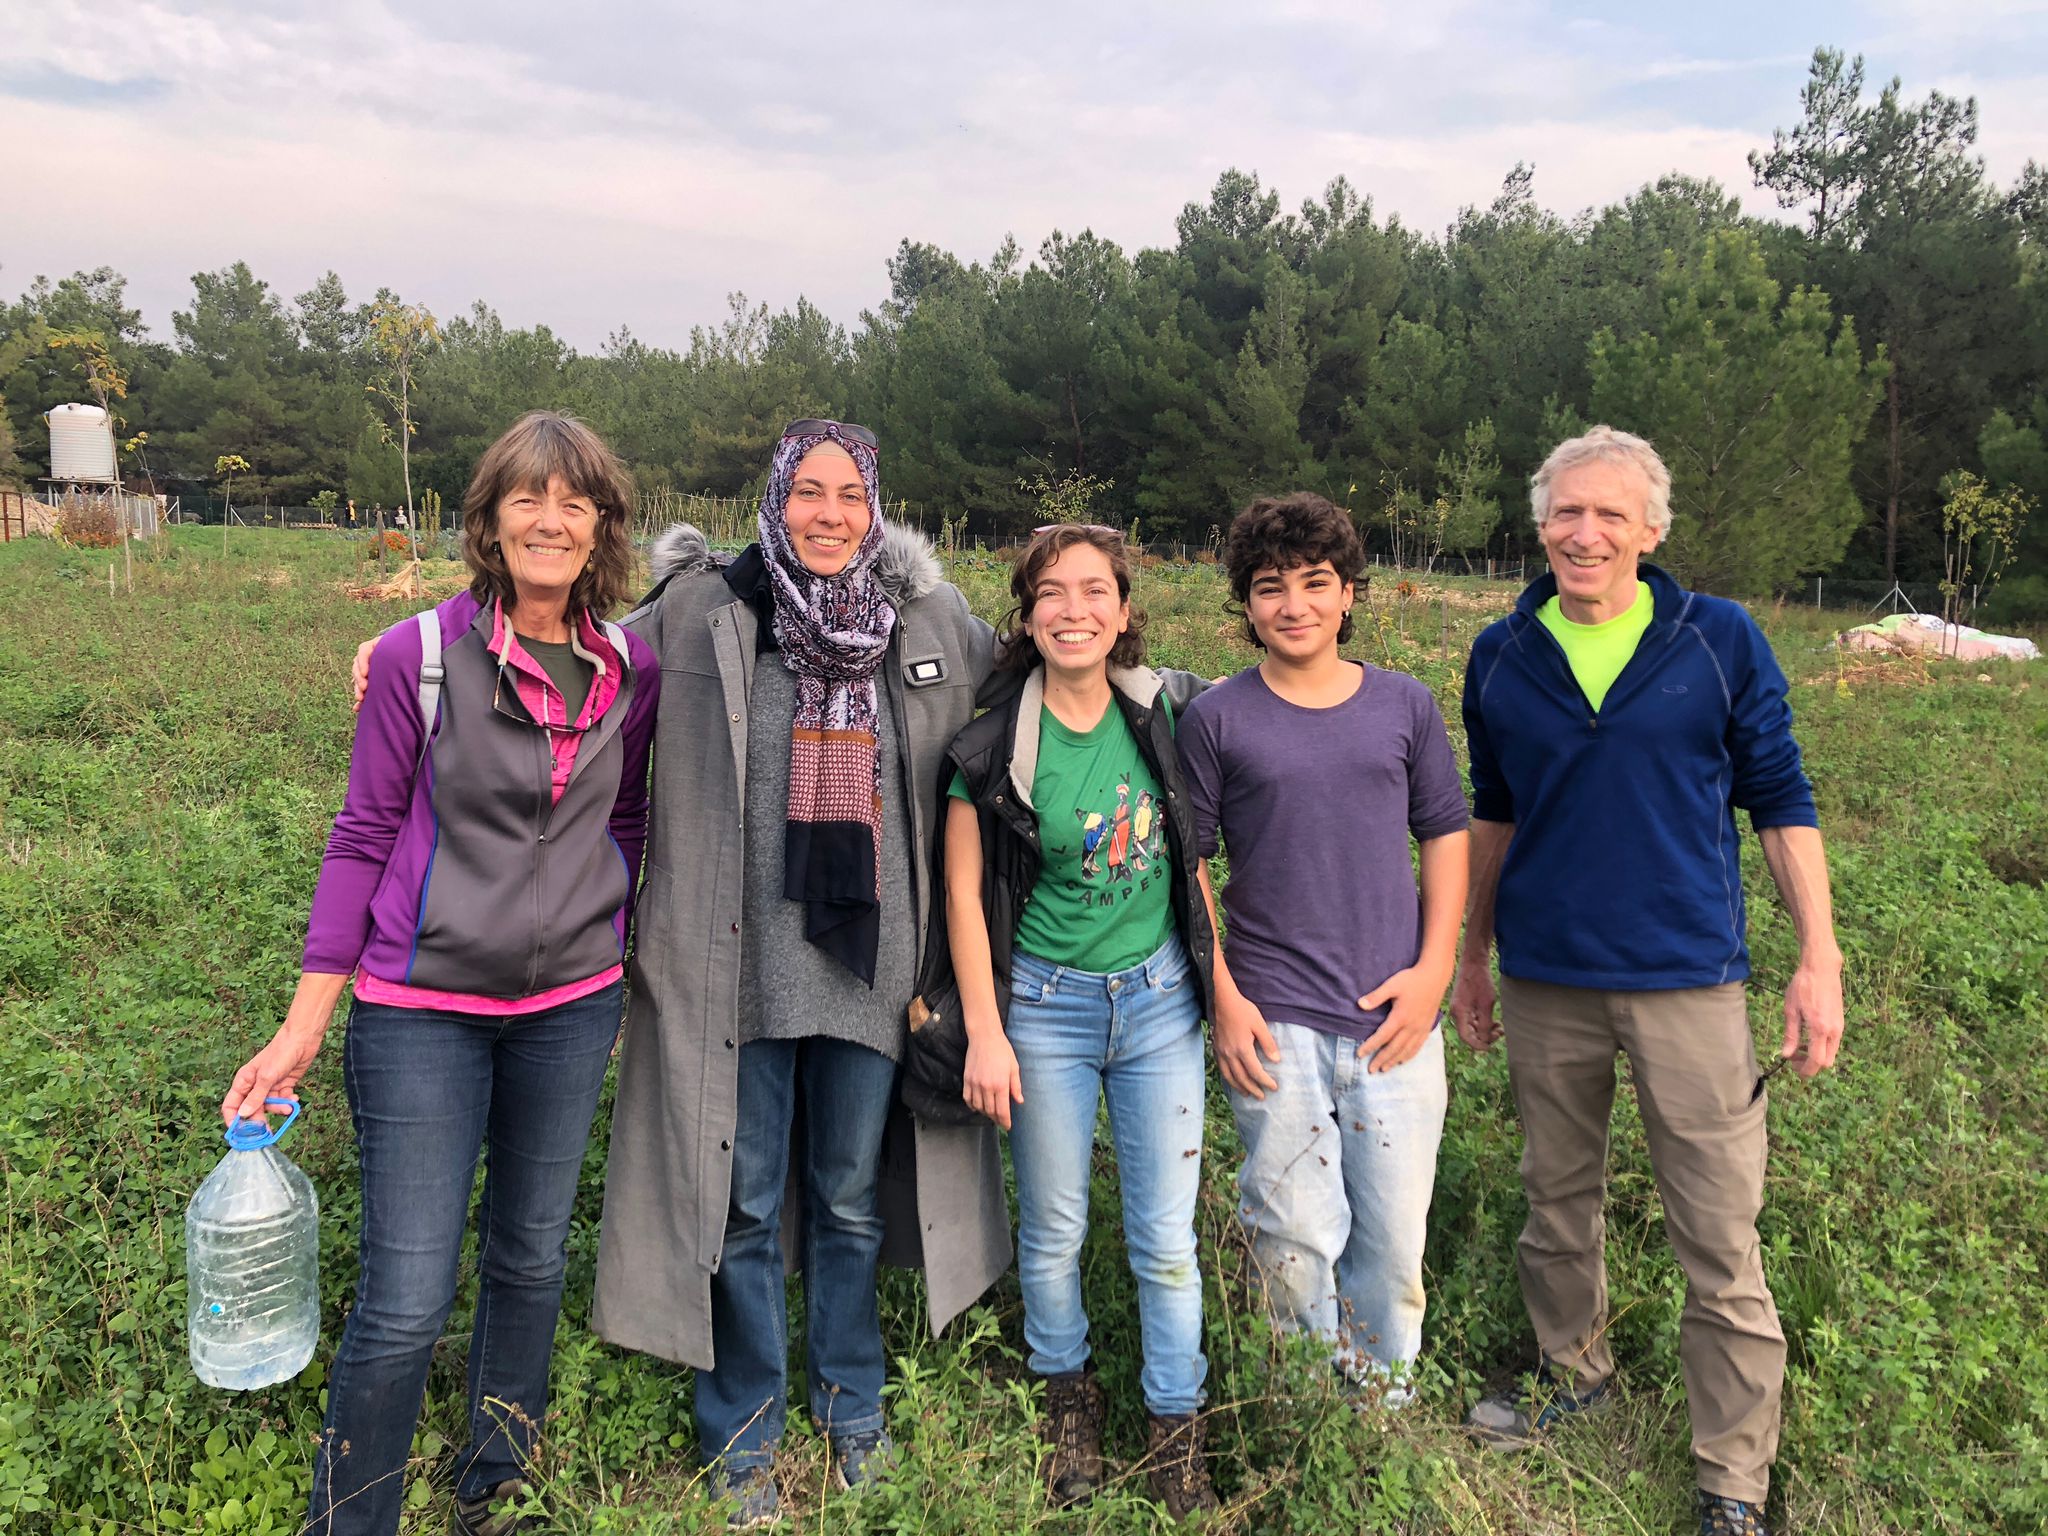 A college faculty and his students pose and smile standing in a lush green field.